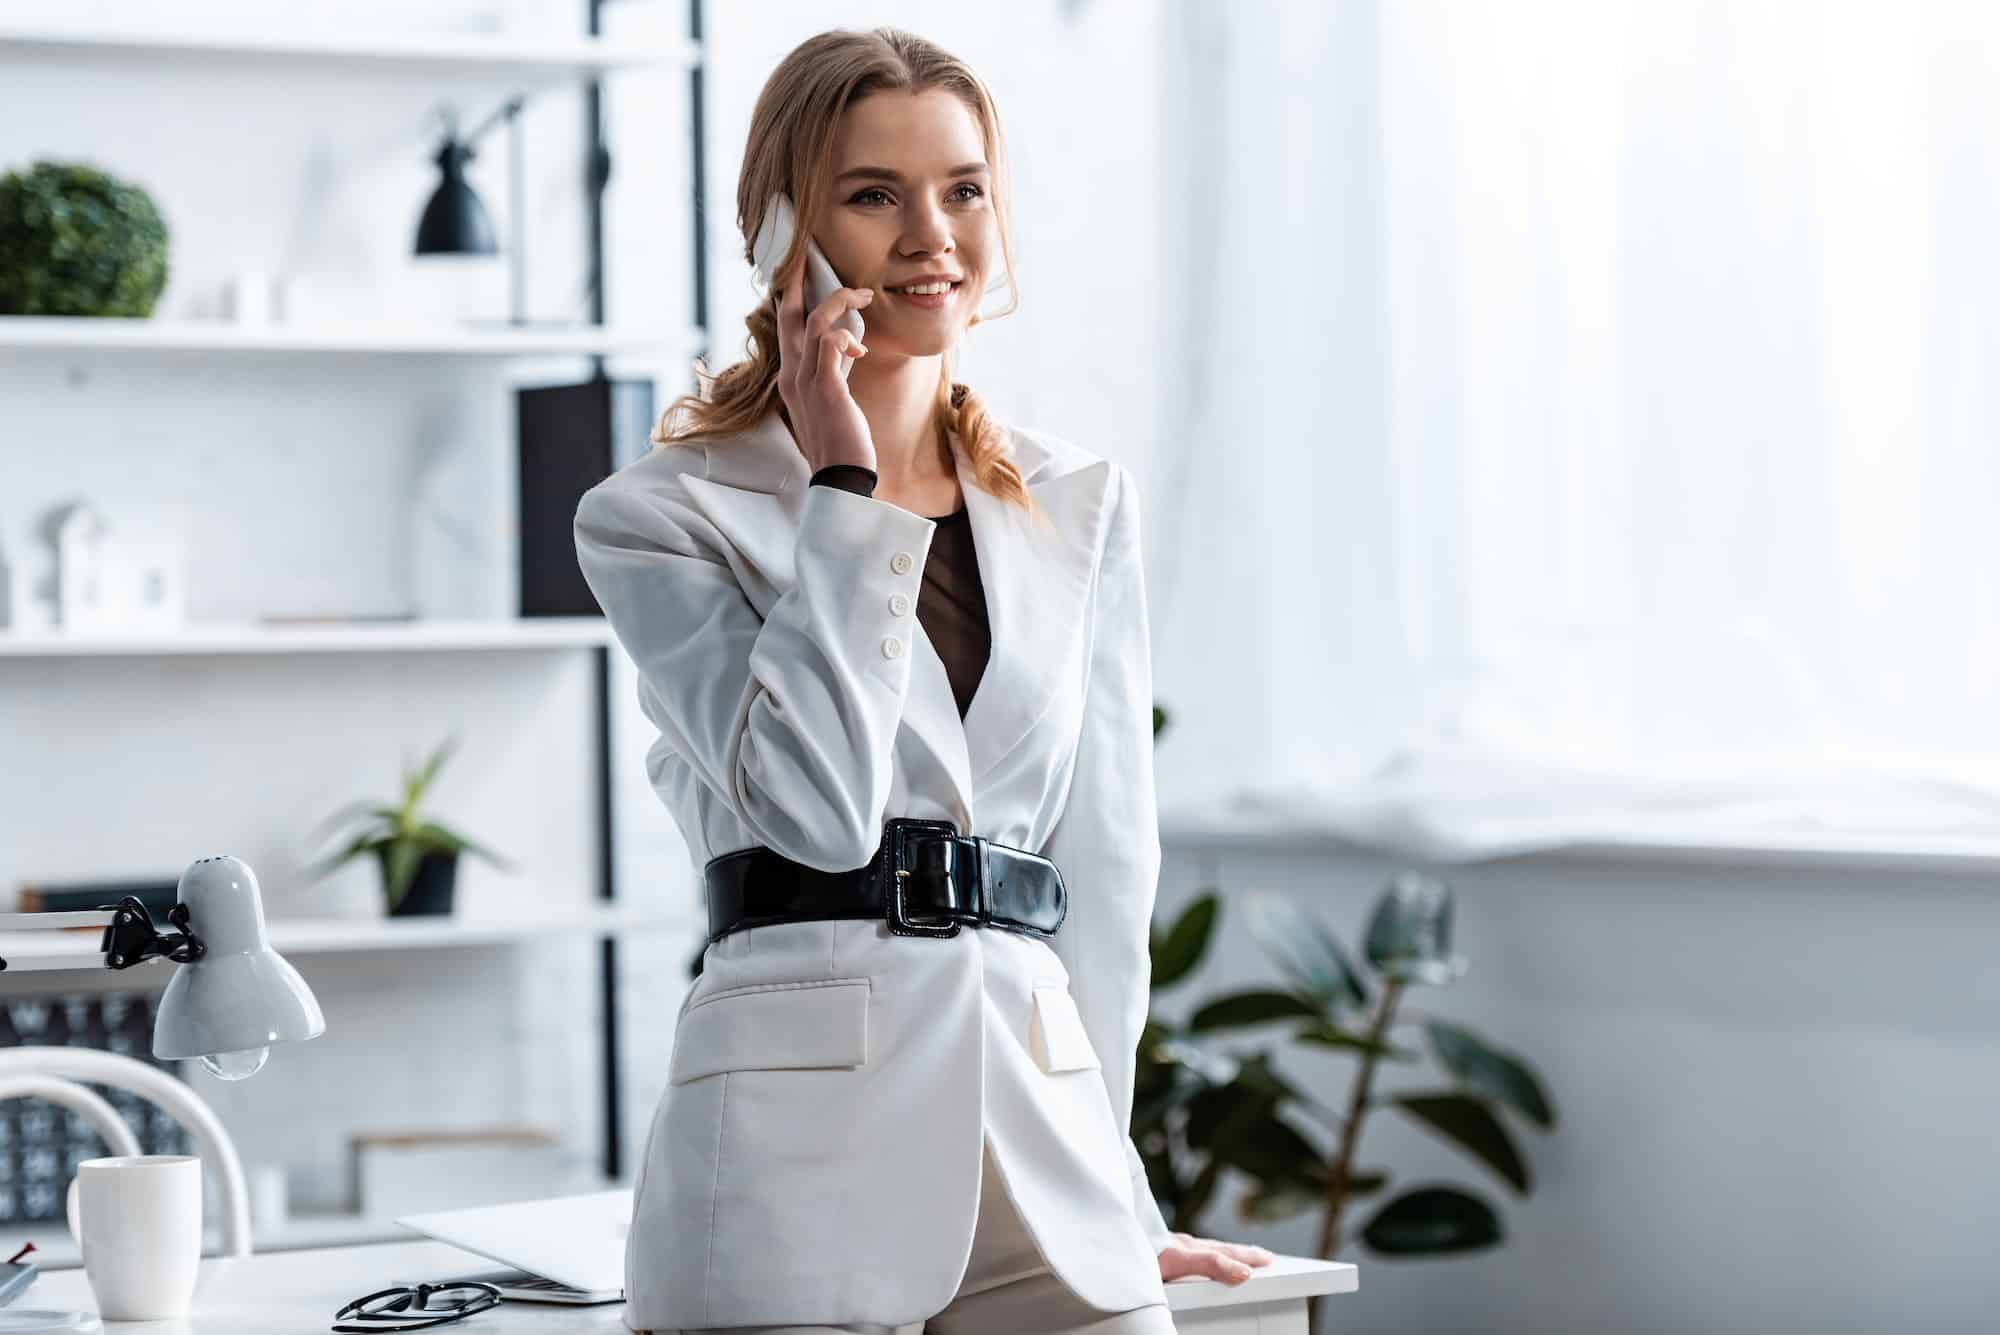 smiling businesswoman in white formal wear talking on smartphone at workplace